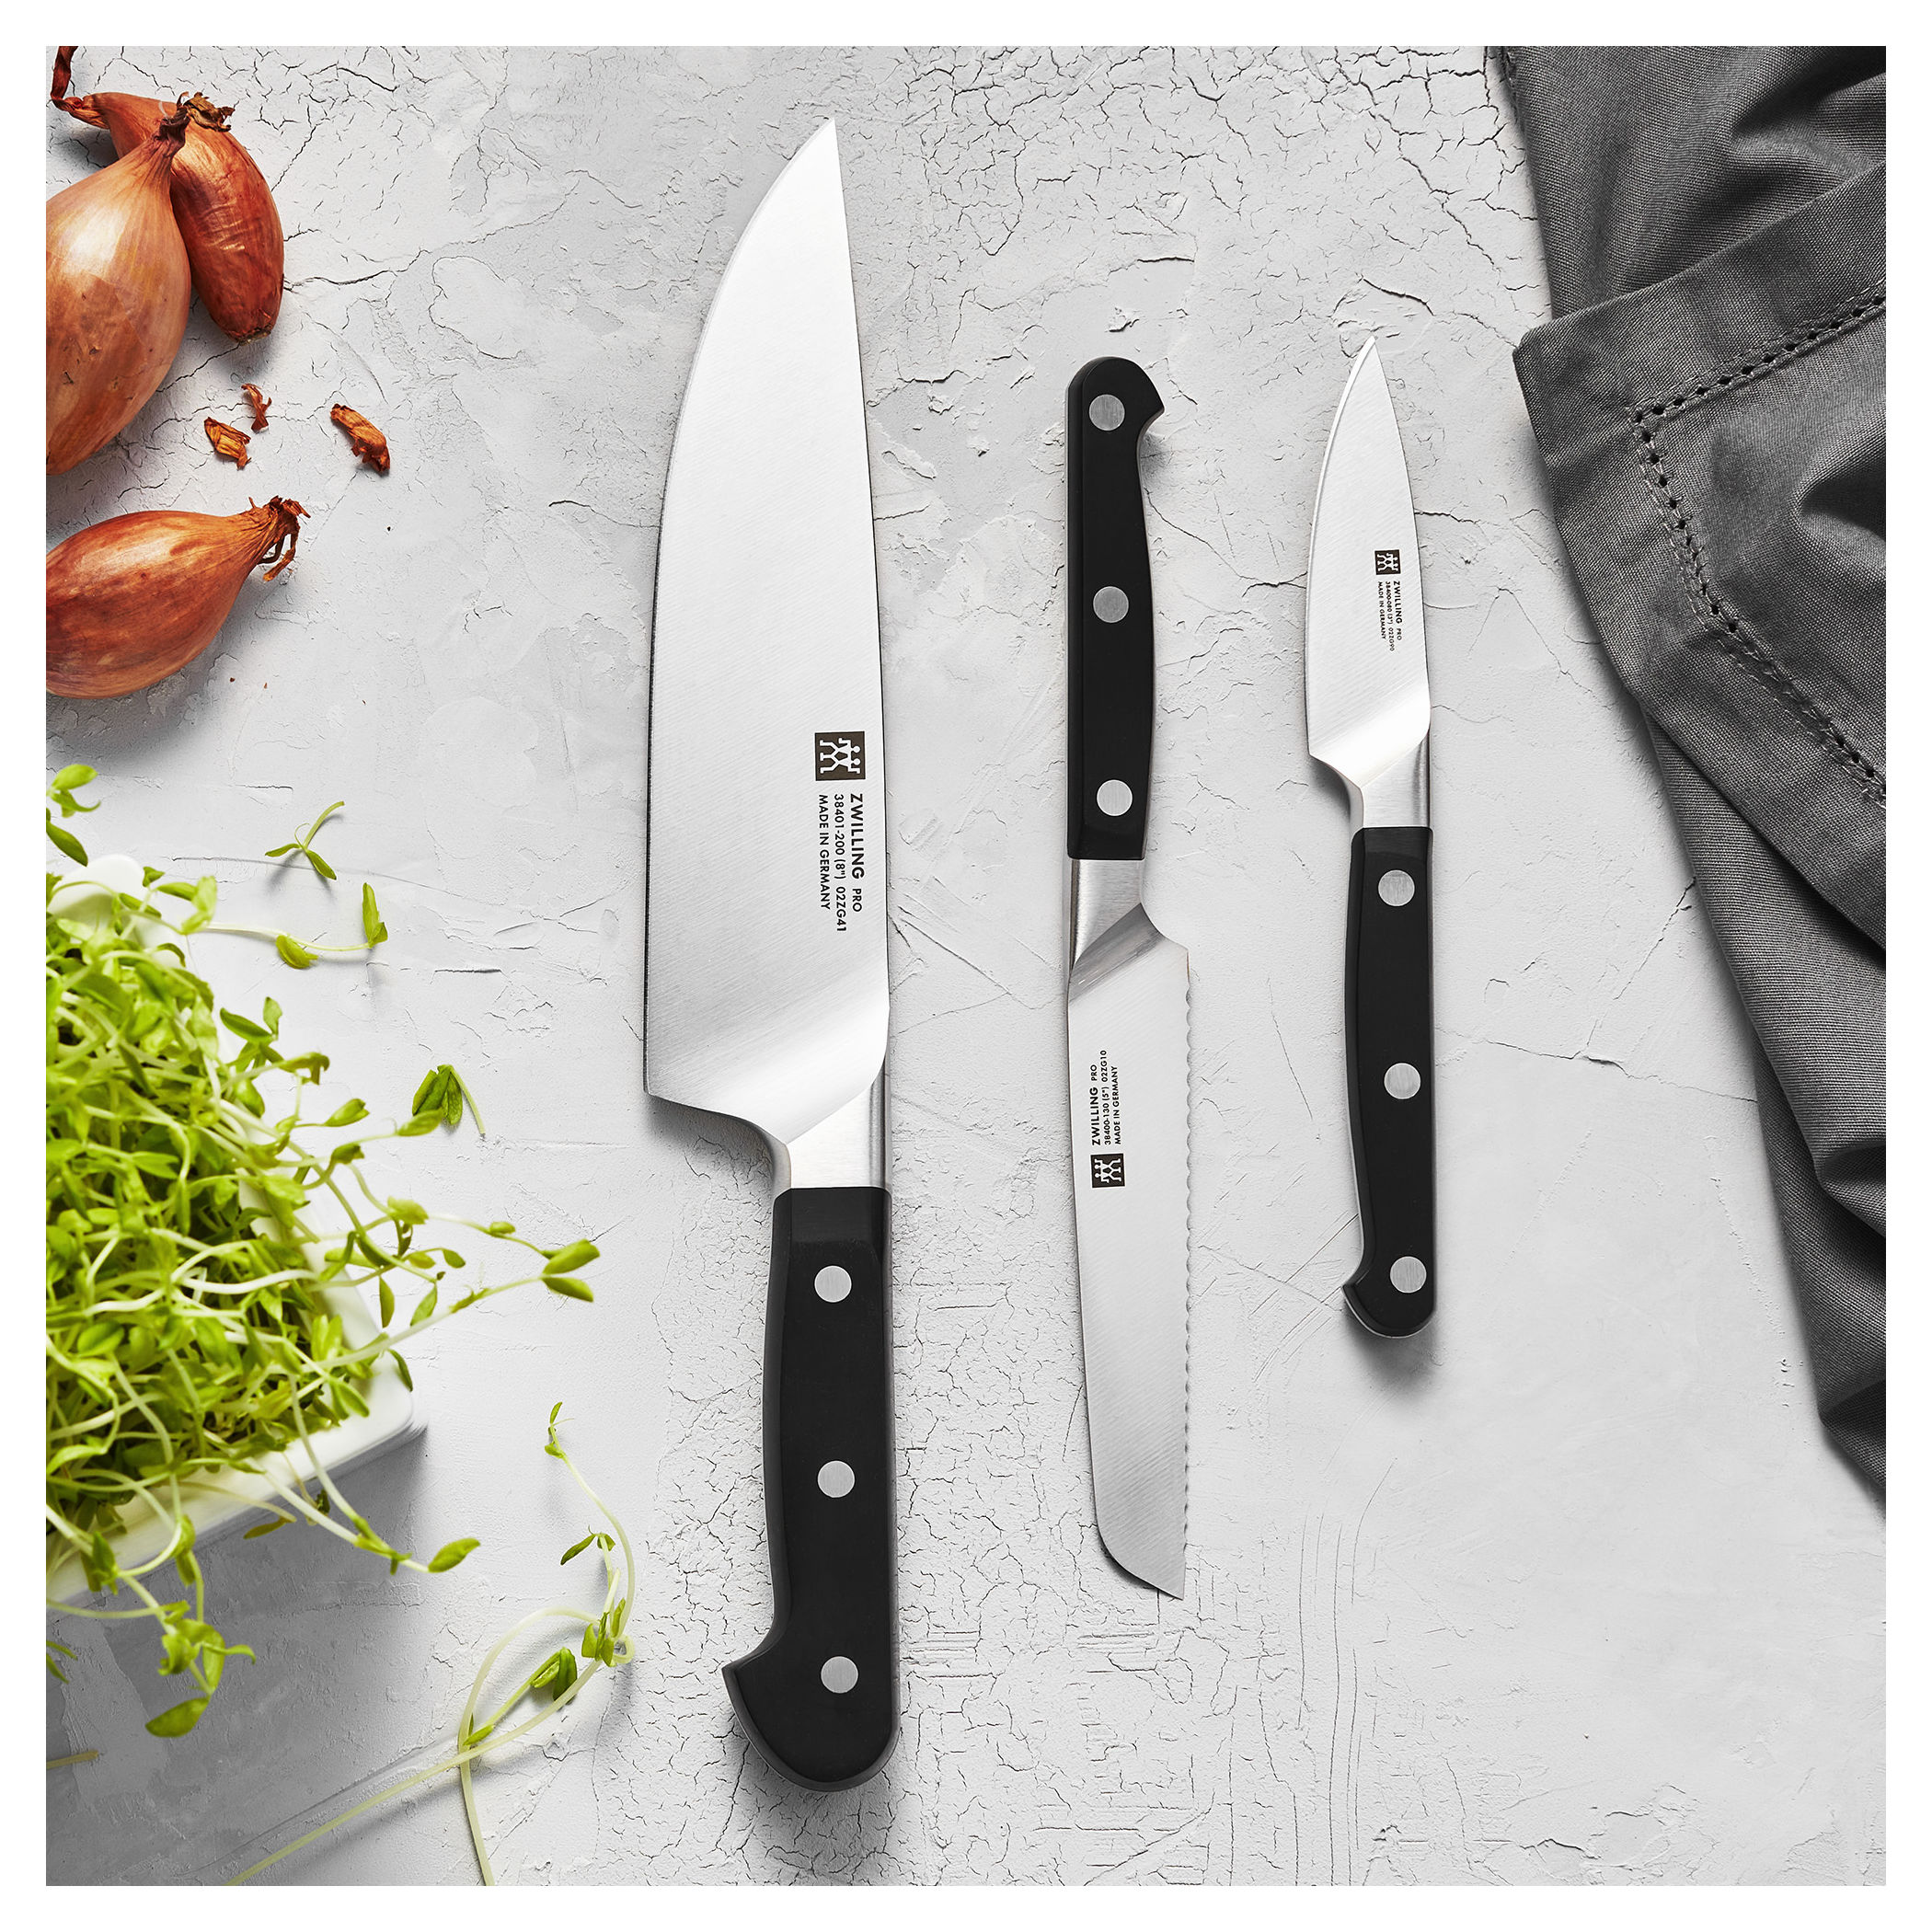 Serrated Royal Blue 5-Piece Ceramic Knife Set with 5 inch Serrated Knife, Kitchen Knife Set. Includes 3, 4, 5, 6 Ceramic Knives, Matching Sheaths and